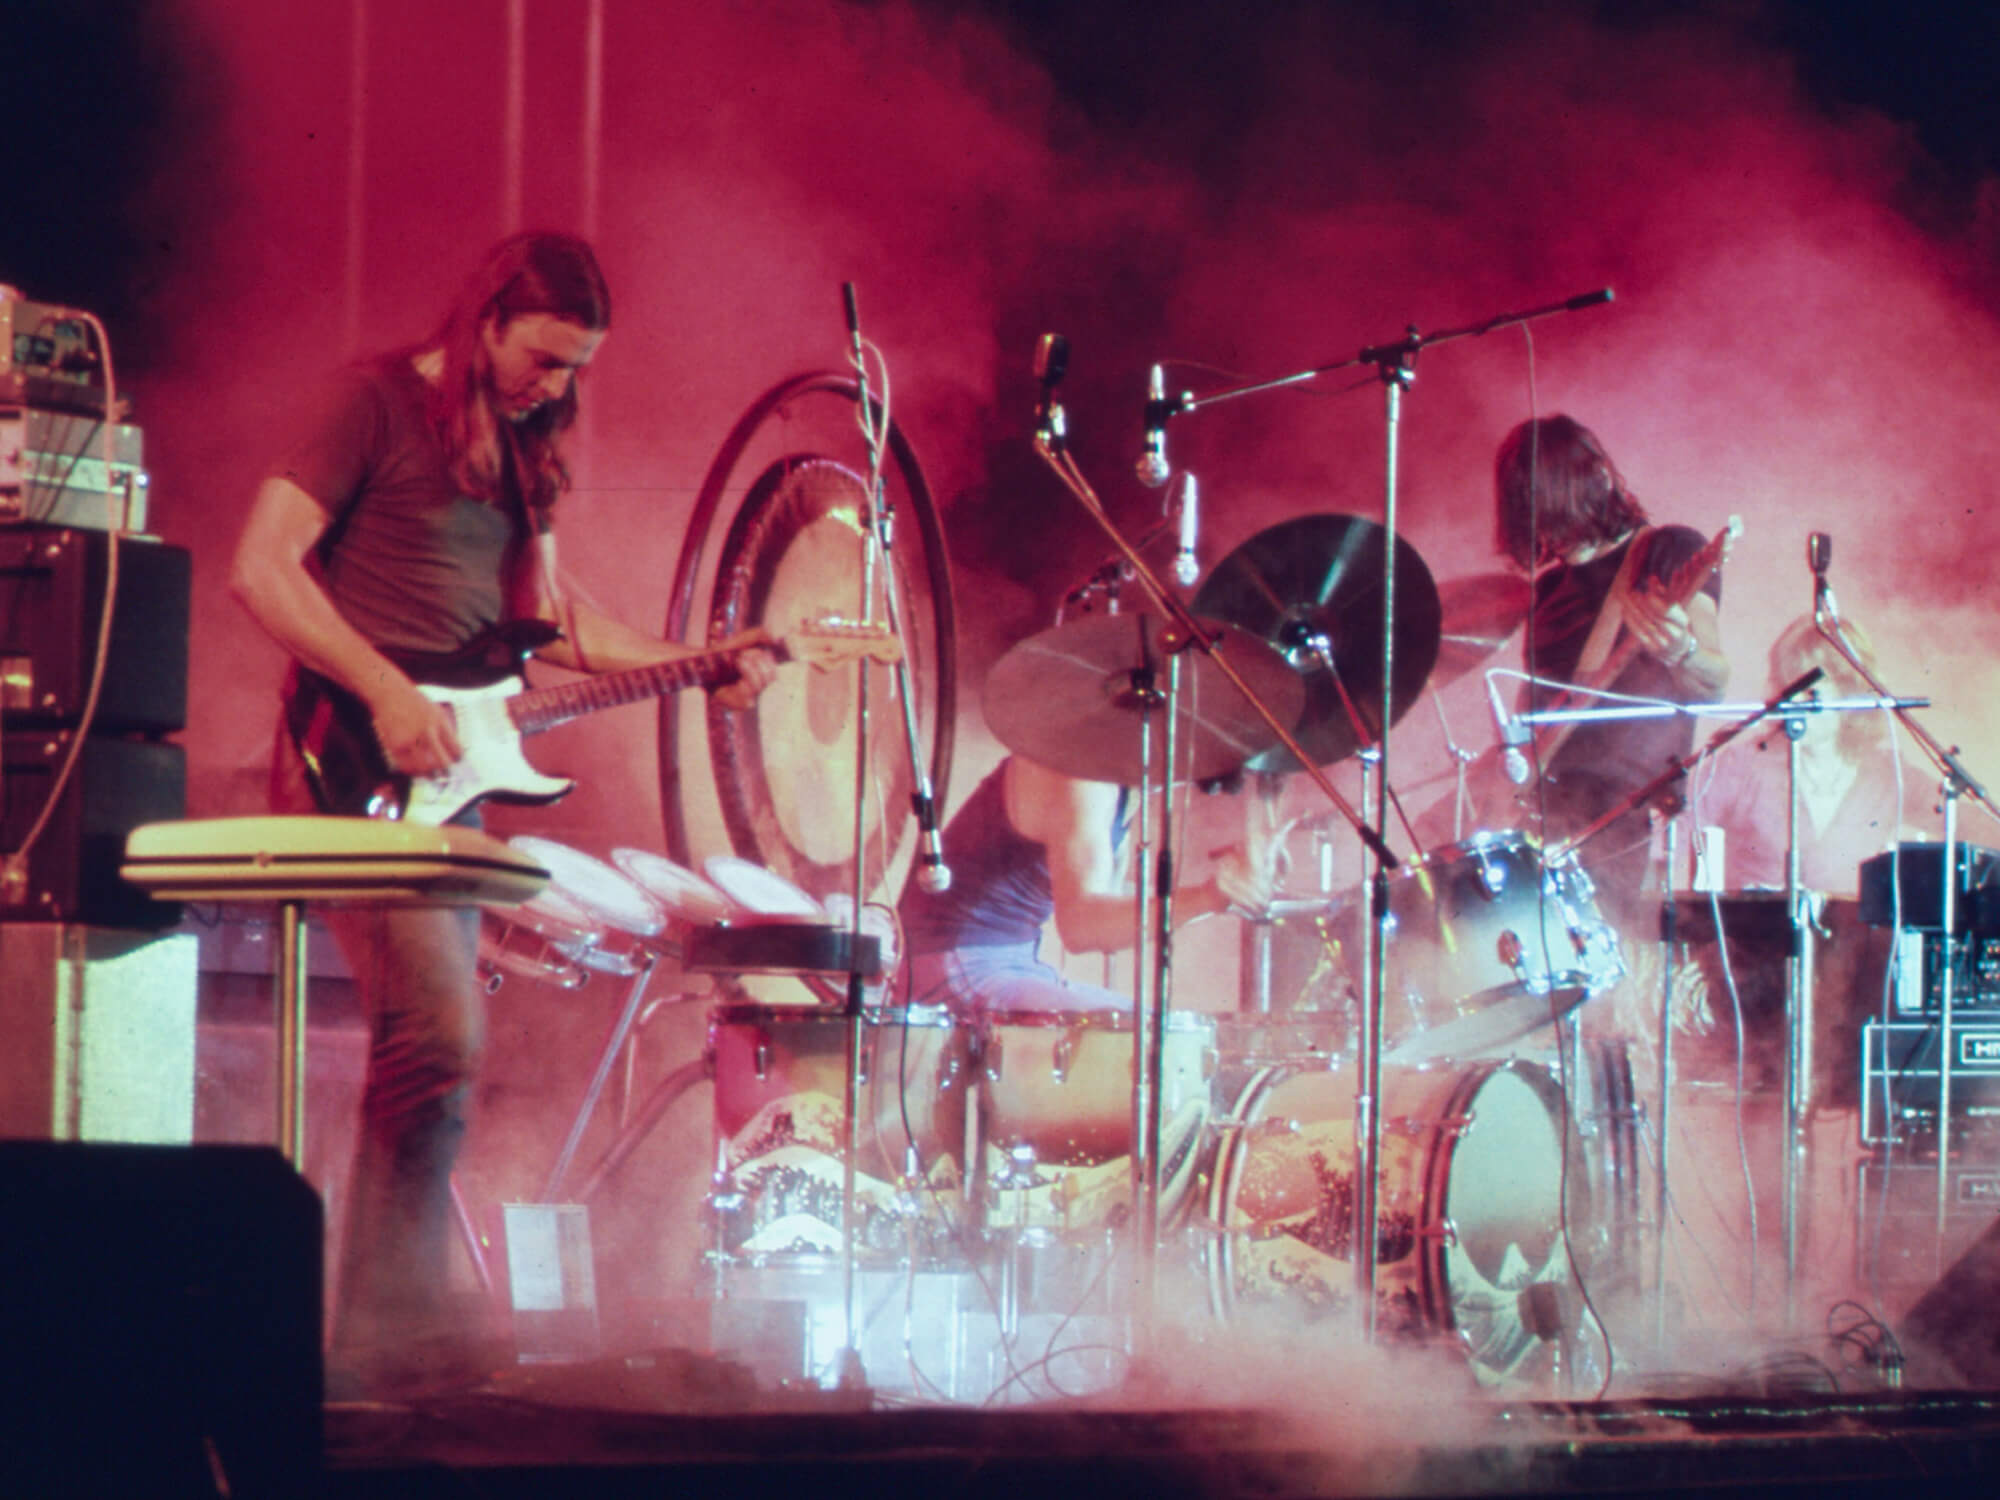 Pink Floyd performing live in 1973, photo courtesy of the National Archives, Smith Collection/Gado via Getty Images